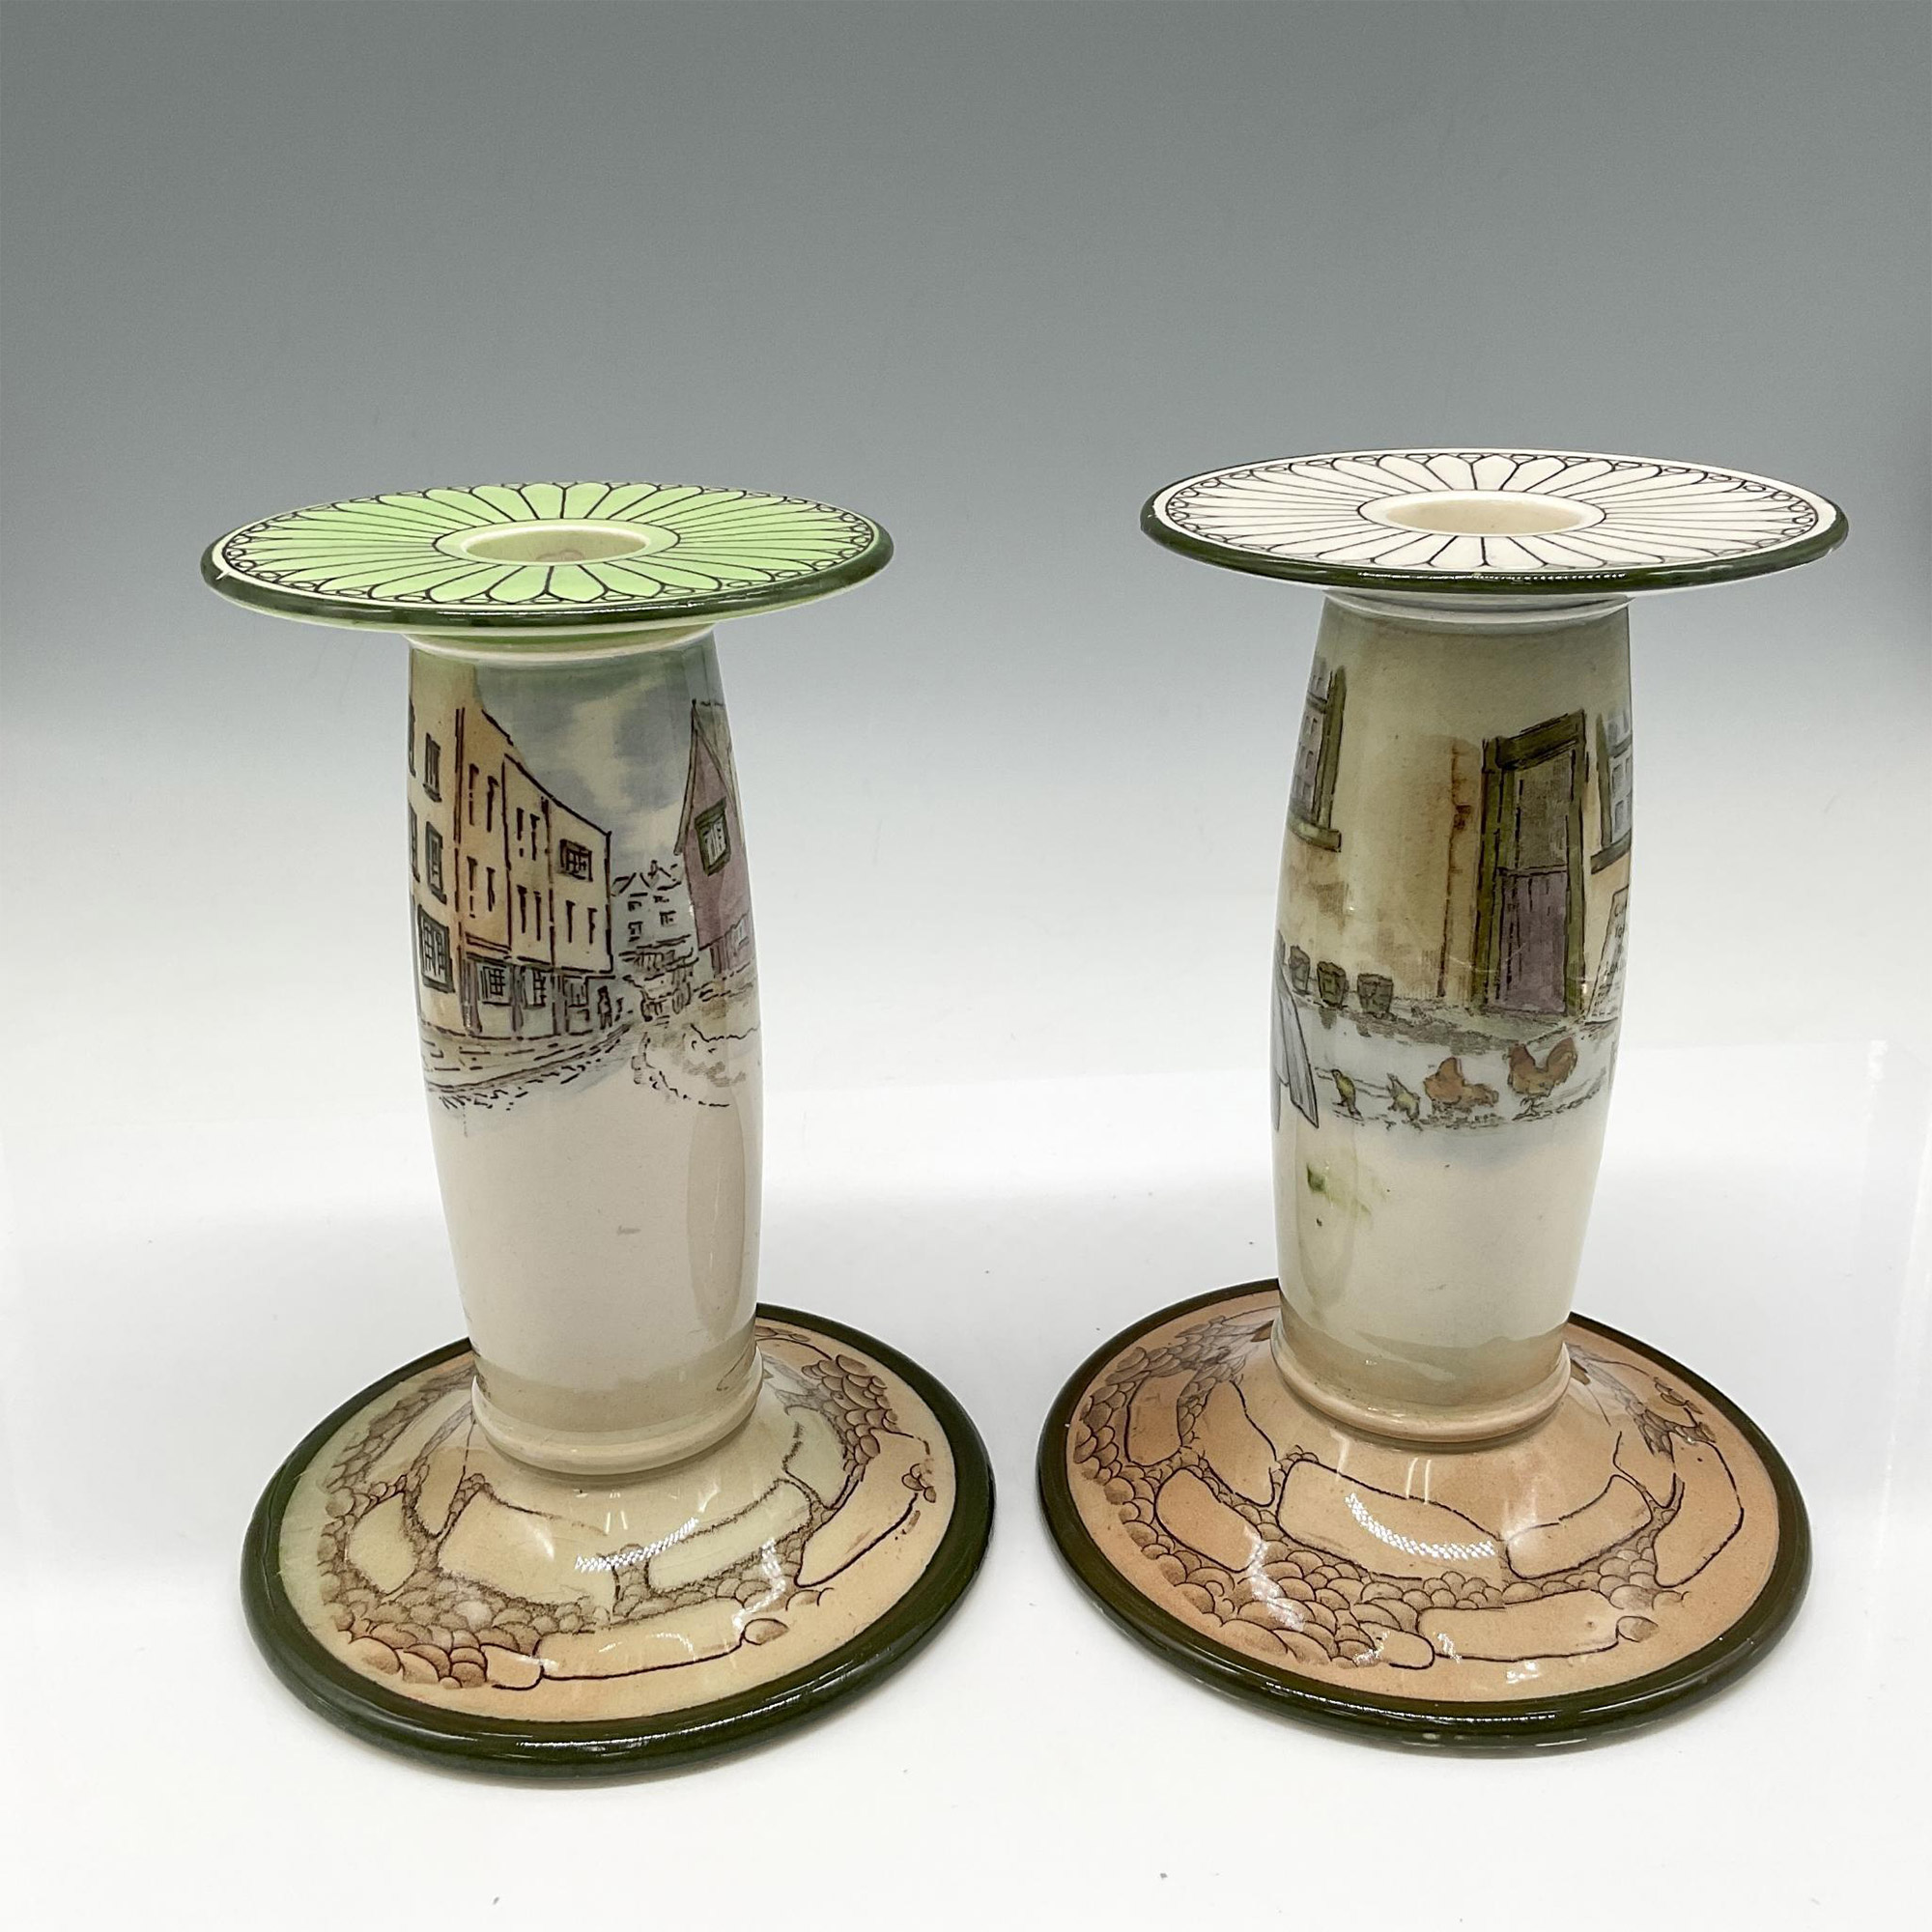 Pair of Royal Doulton Dickens Ware Candle Holders - Image 2 of 3